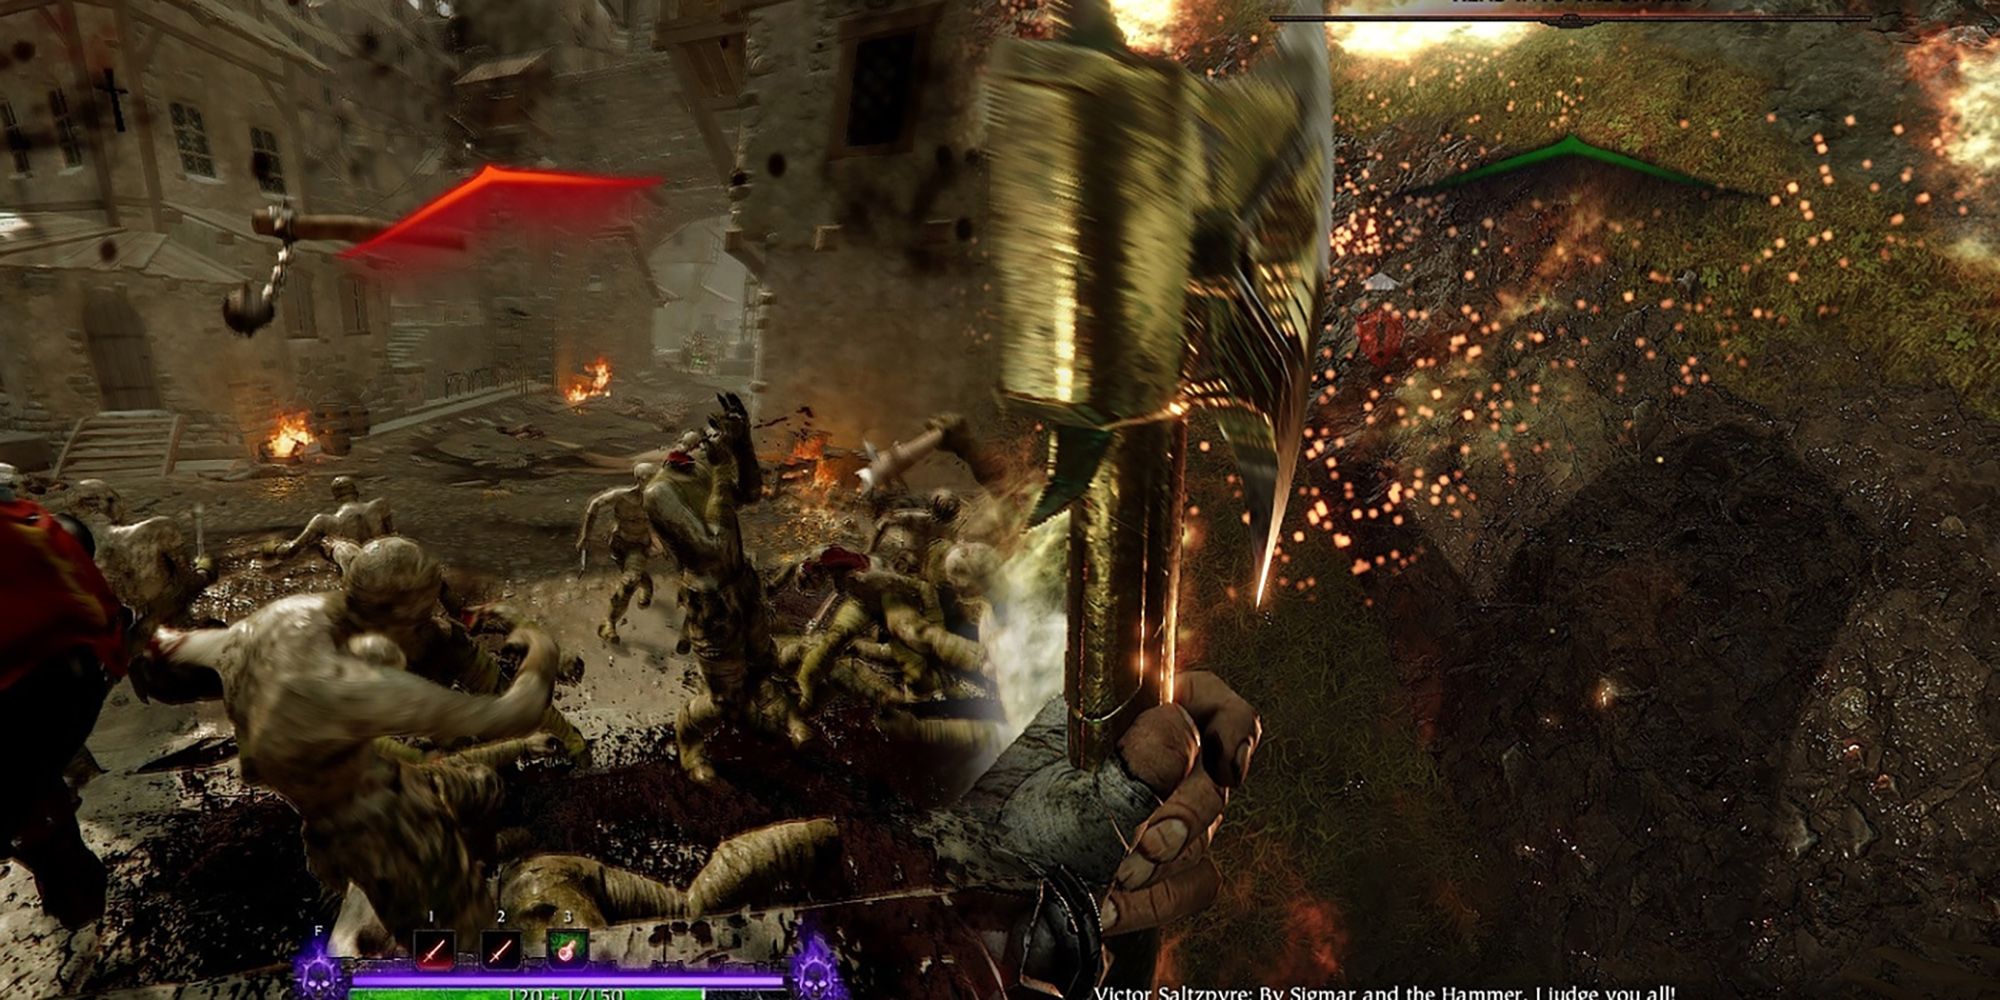 Warhammer Vermintide 2 - What The Normal Damage Indicator Looks Like And How The Friendly Fire One Looks Different